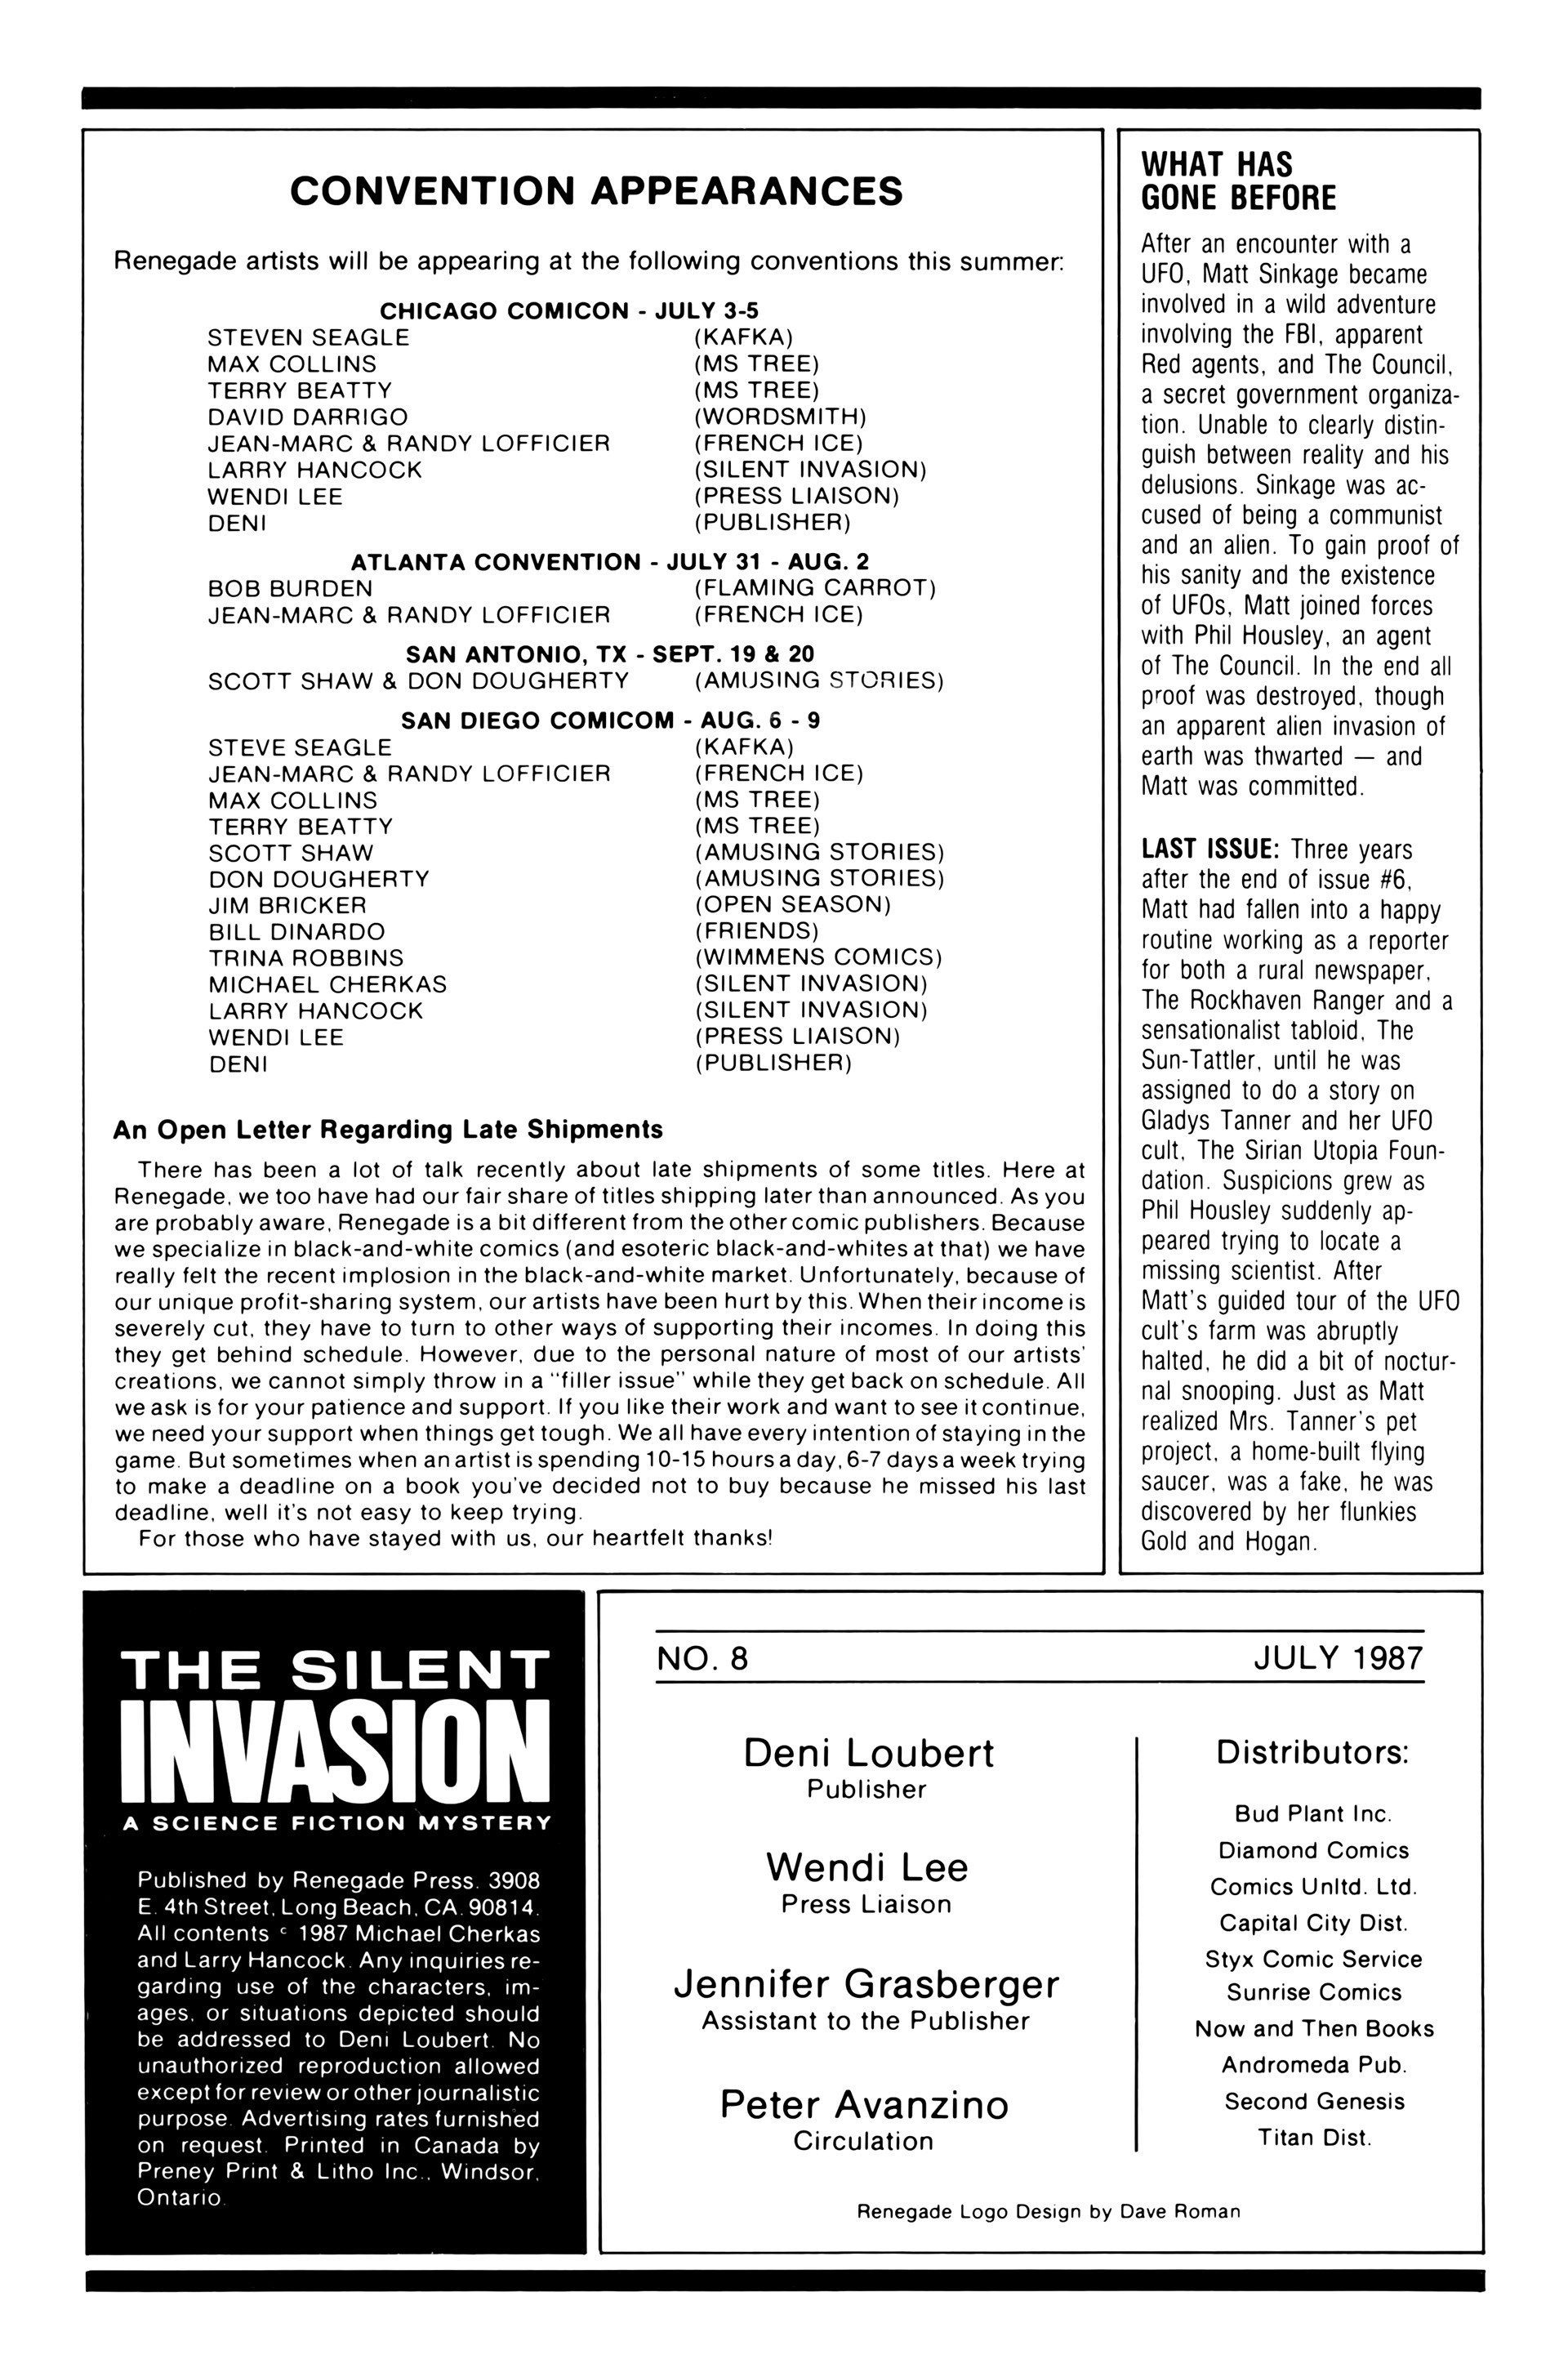 Read online Silent Invasion comic -  Issue #8 - 2